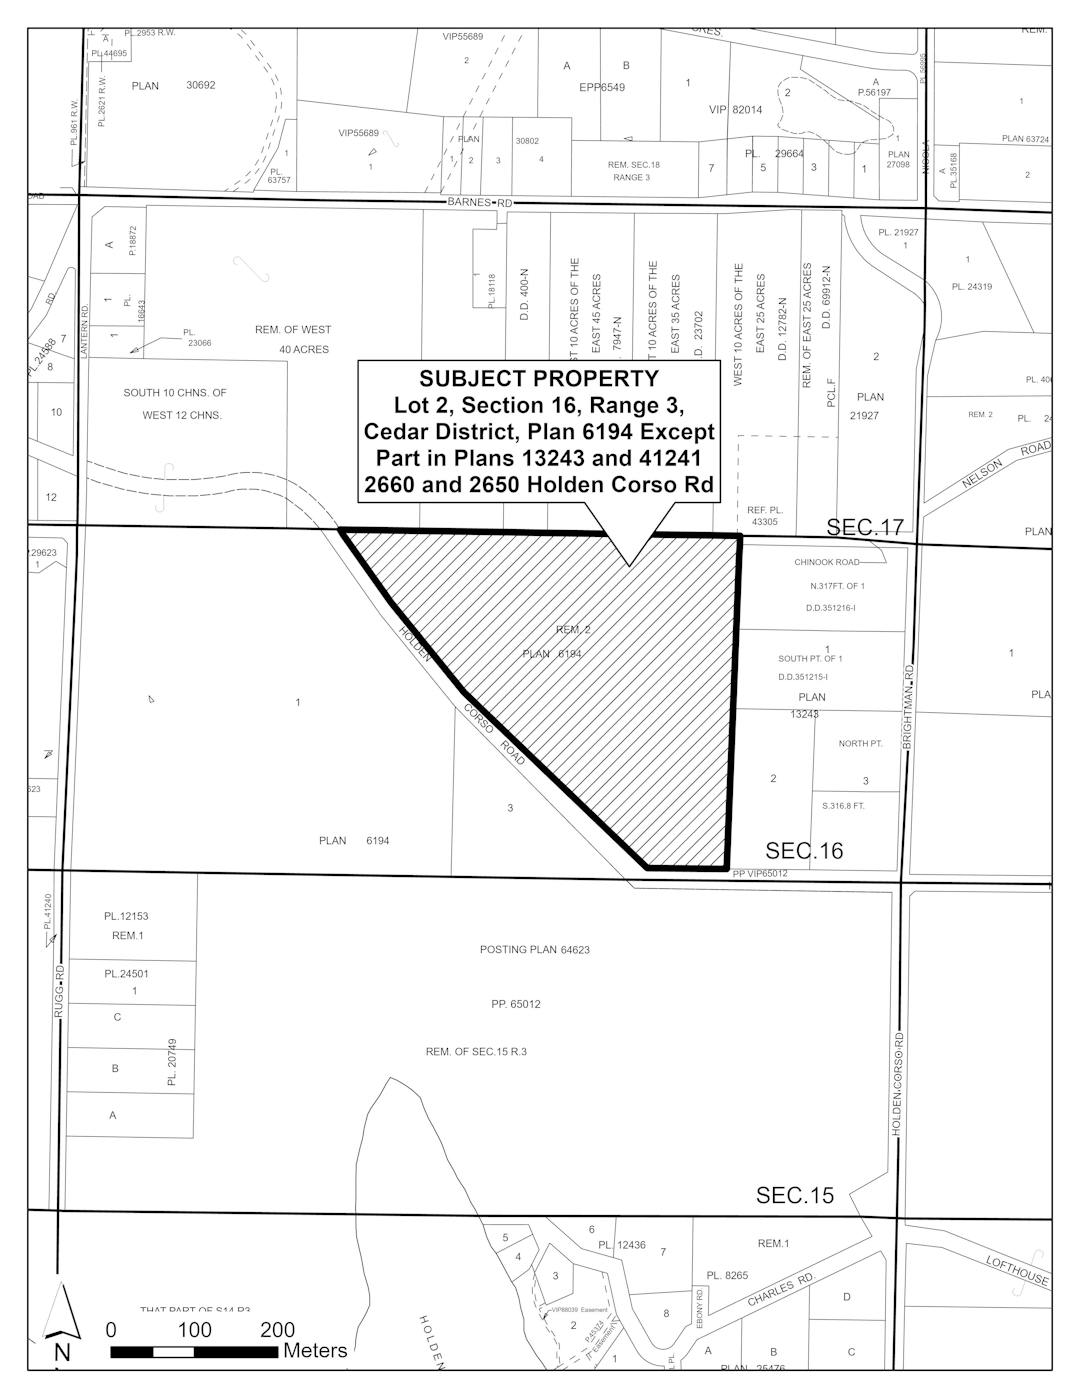 The RDN is currently looking for your input on zoning amendment application PL2019-081.